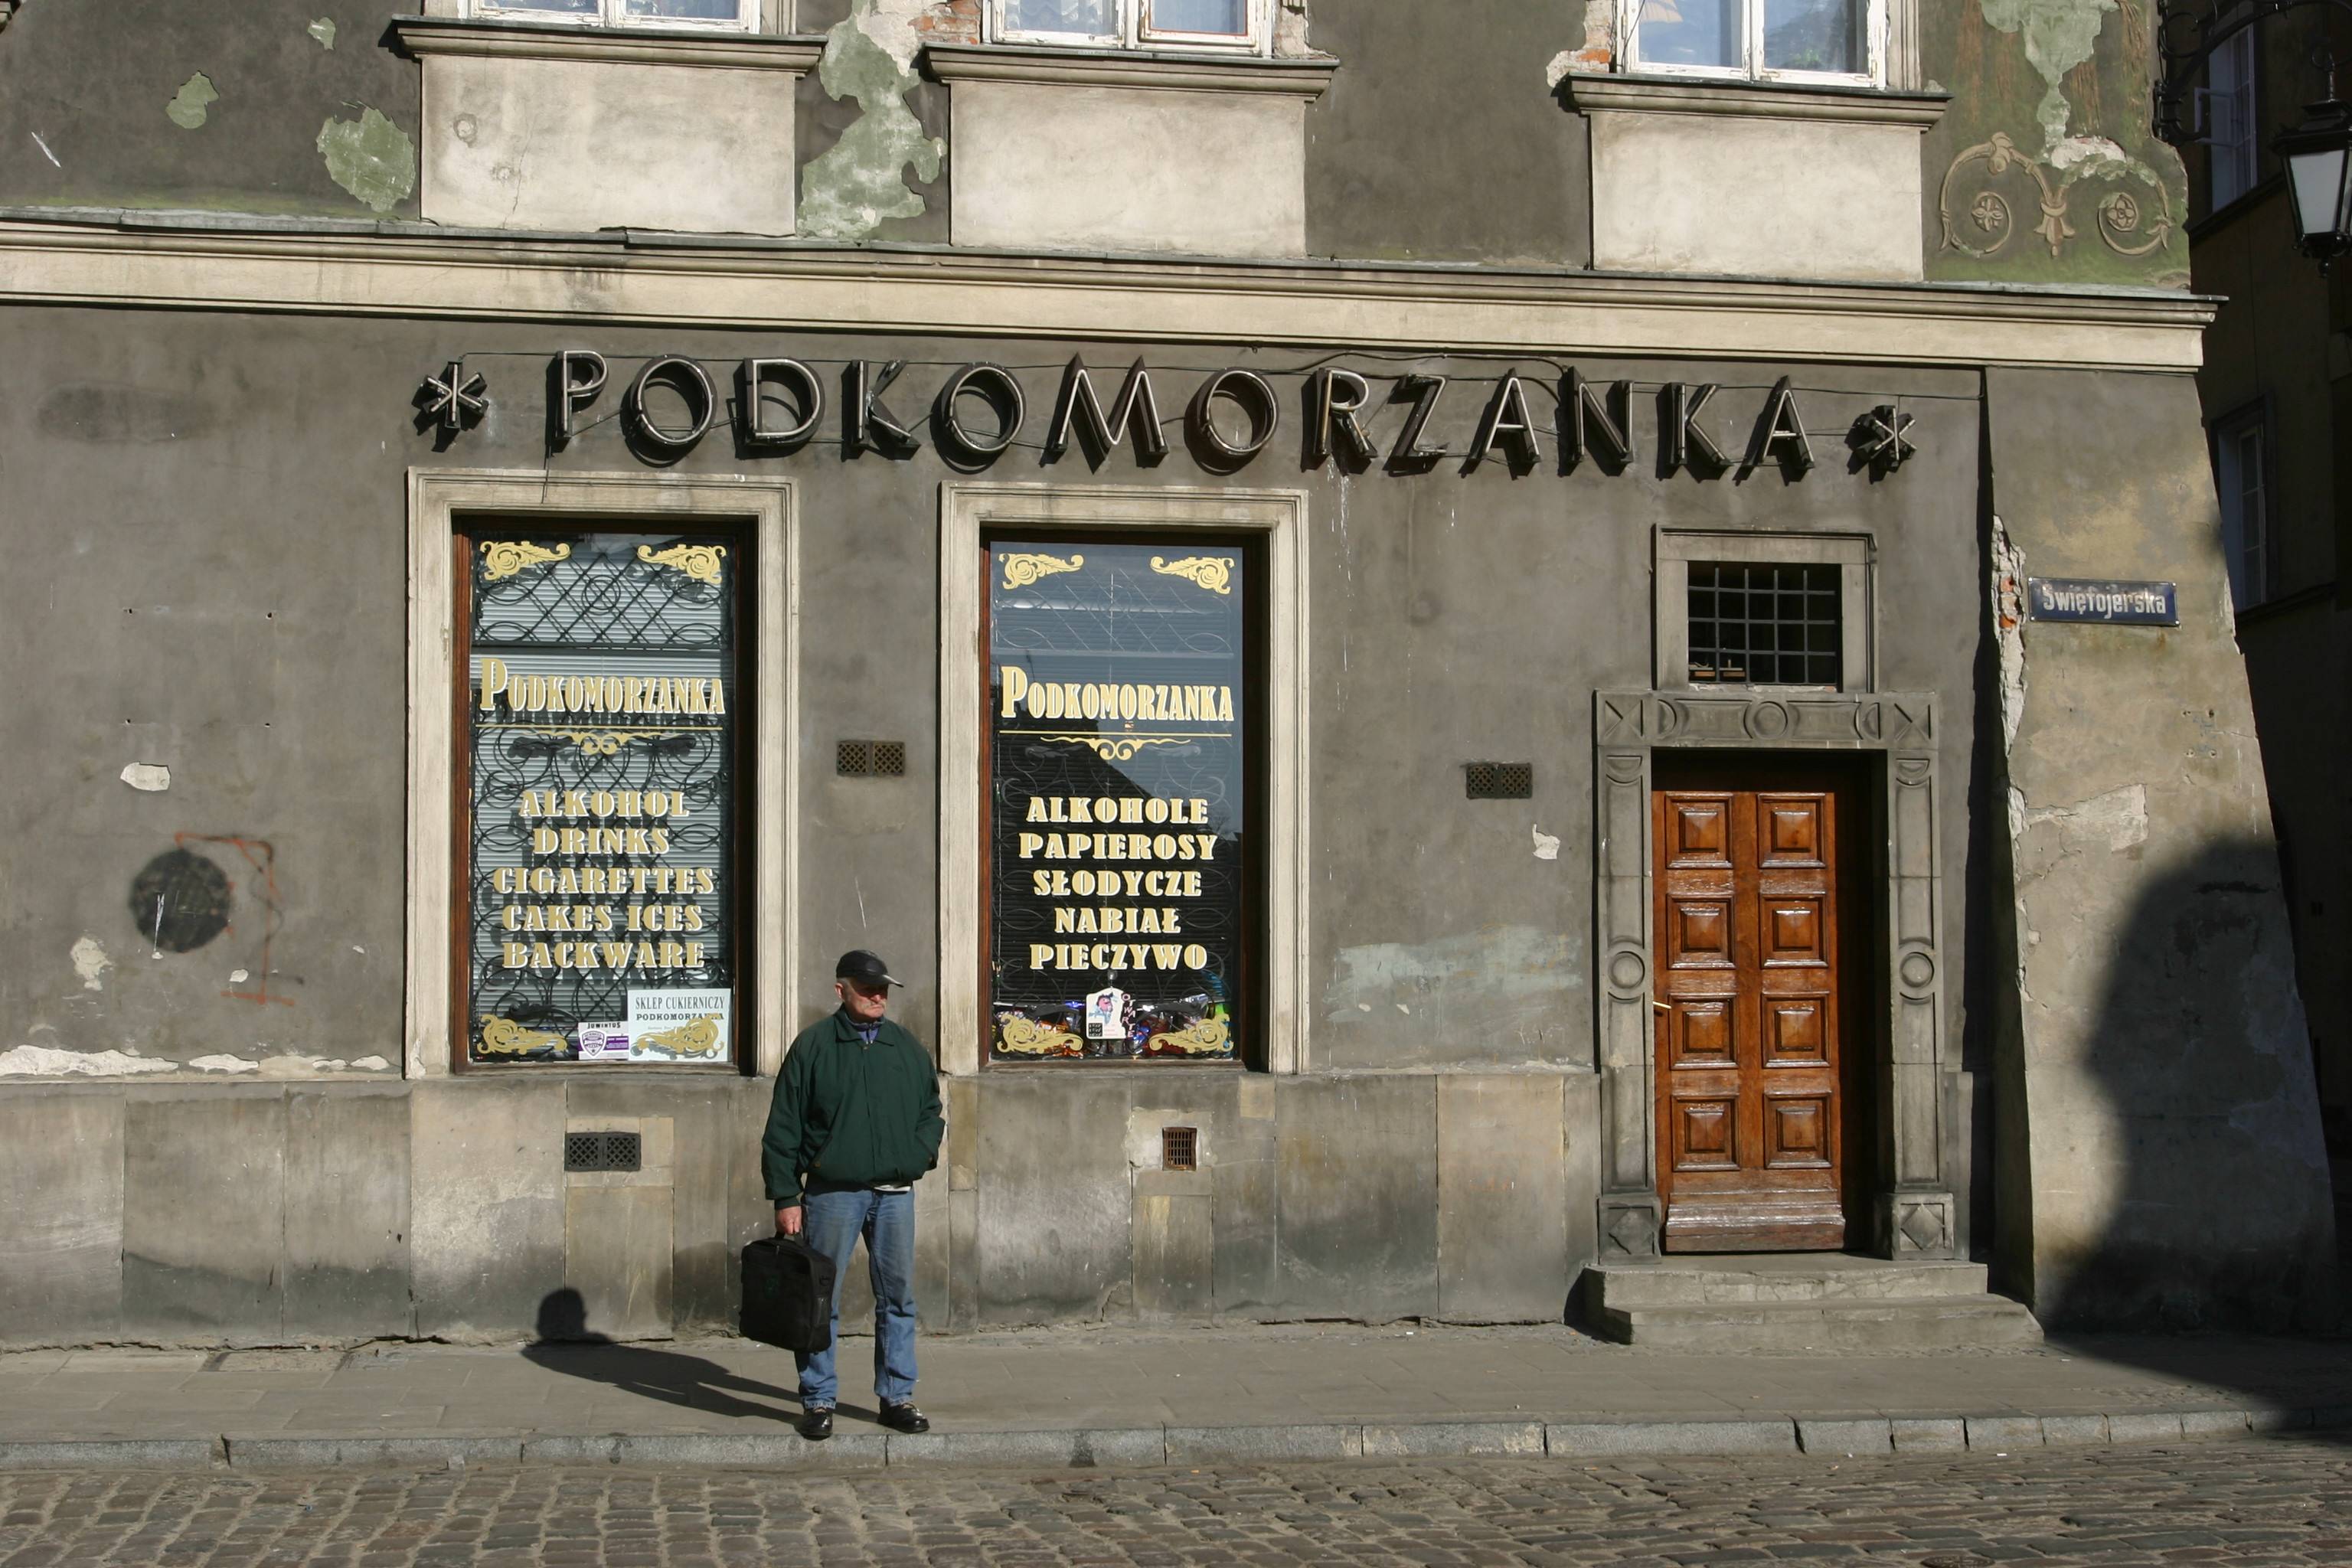 A Grocery Store near the Old Town